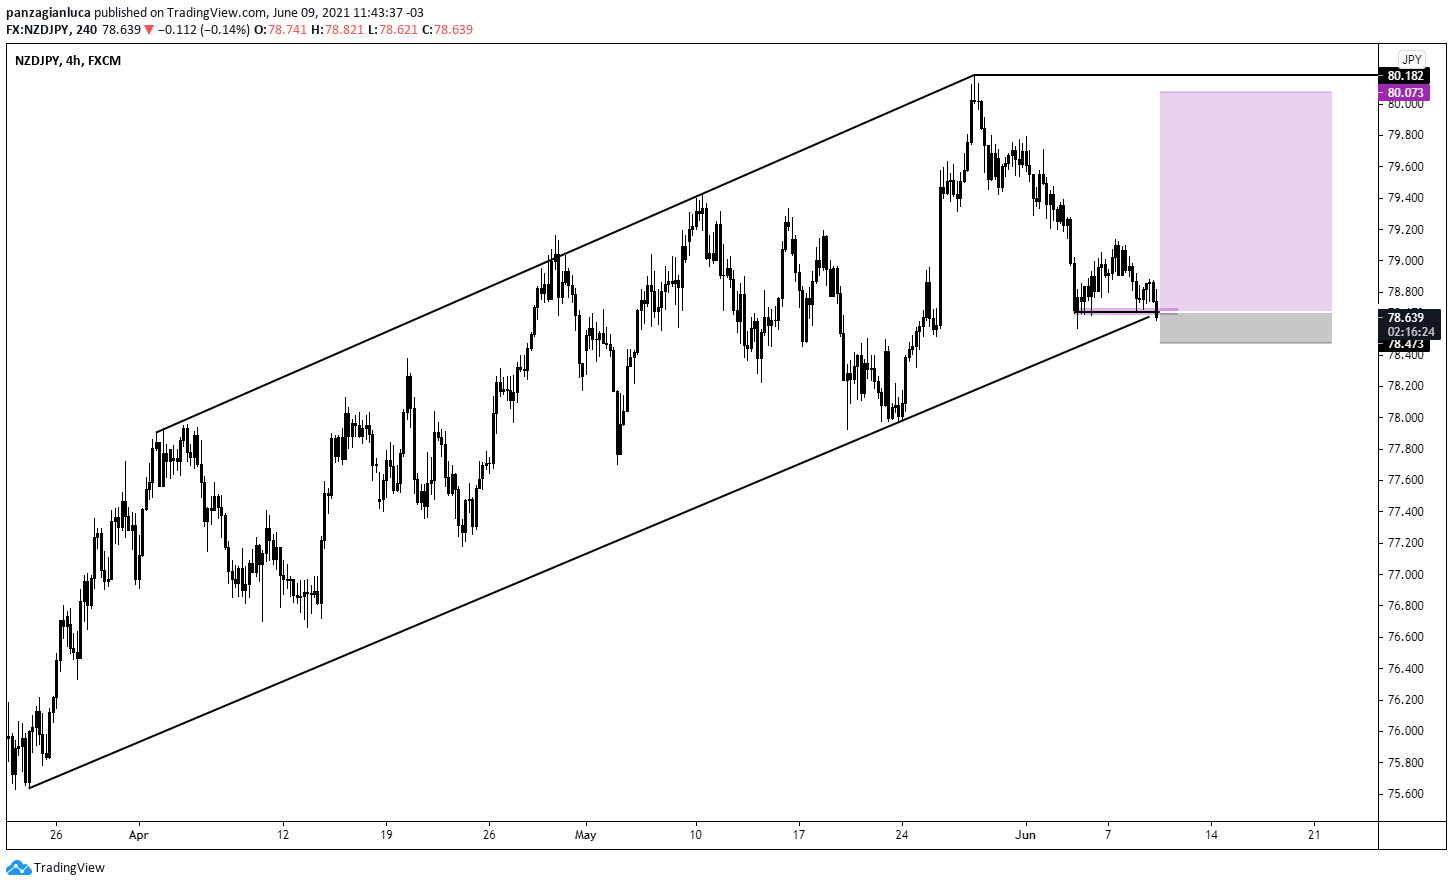 NZD/JPY H4 Price Action